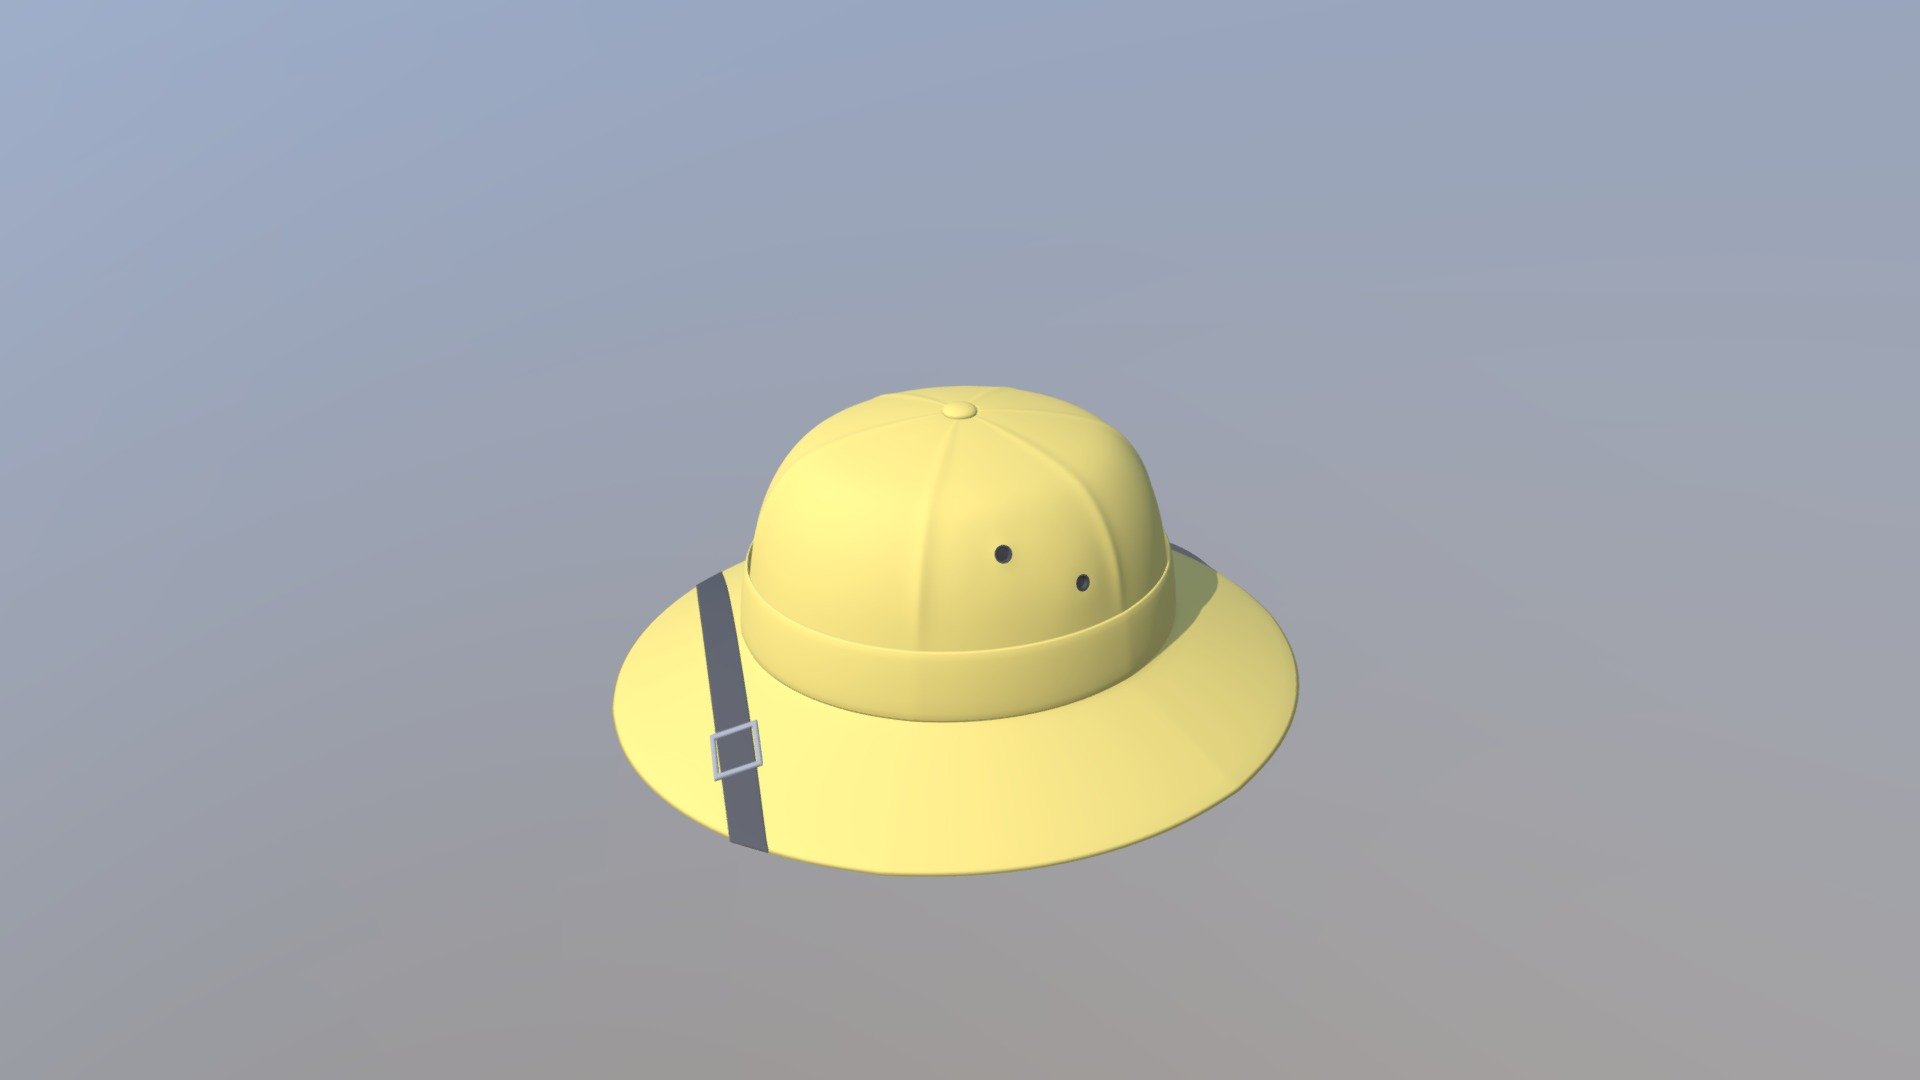 This is a 3d model of a safari hat. The hat was modeled and prepared for cartoon style renderings, background, general CG visualization etc presented as a mesh with quads only.

Verts : 22.526 Faces: 22.528

The 3d hat have simple materials with diffuse colors.

No ring, maps and no UVW mapping is available.

The original file was created in blender. You will receive a 3DS, OBJ, FBX, blend, DAE, Stl.

All preview images were rendered with Blender Cycles. Product is ready to render out-of-the-box. Please note that the lights, cameras, and background is only included in the .blend file. The model is clean and alone in the other provided files, centred at origin and has real-world scale 3d model